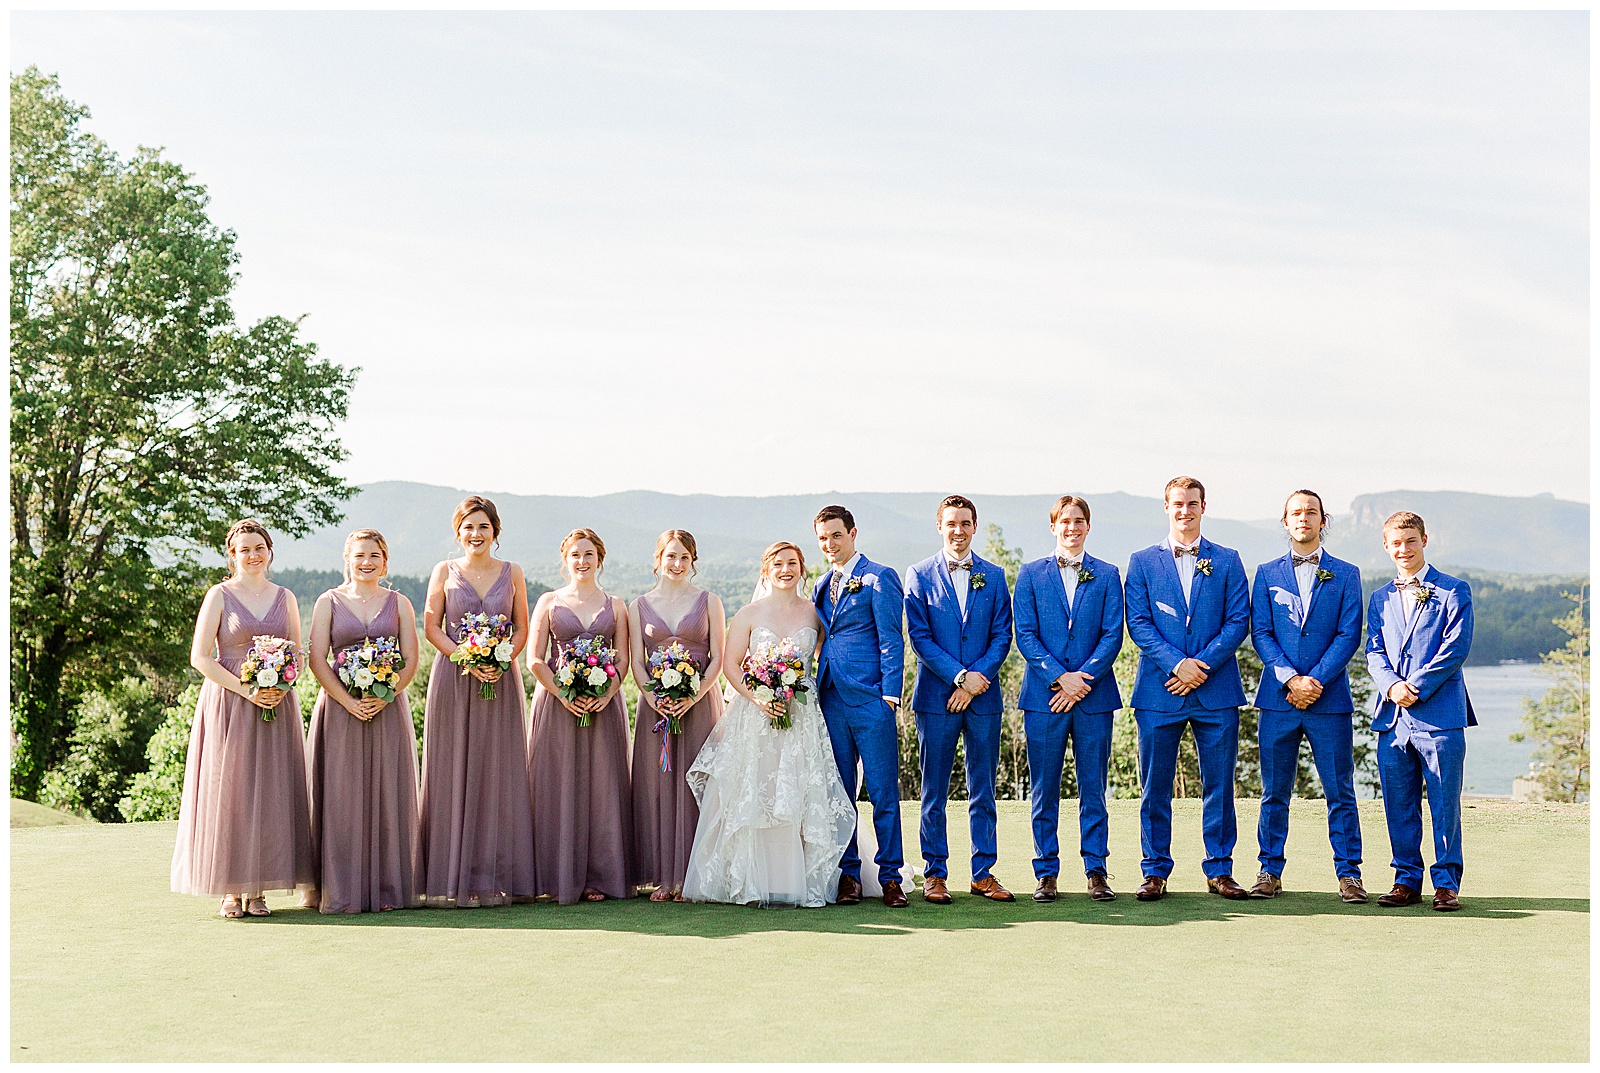 Lavender Purple Bridesmaid Dresses and Sailor Blue Groomsmen Suits color themed wedding group photo from Outdoorsy Summer Wedding at North Carolina Lakehouse in the Mountains | check out the full wedding at KevynDixonPhoto.com